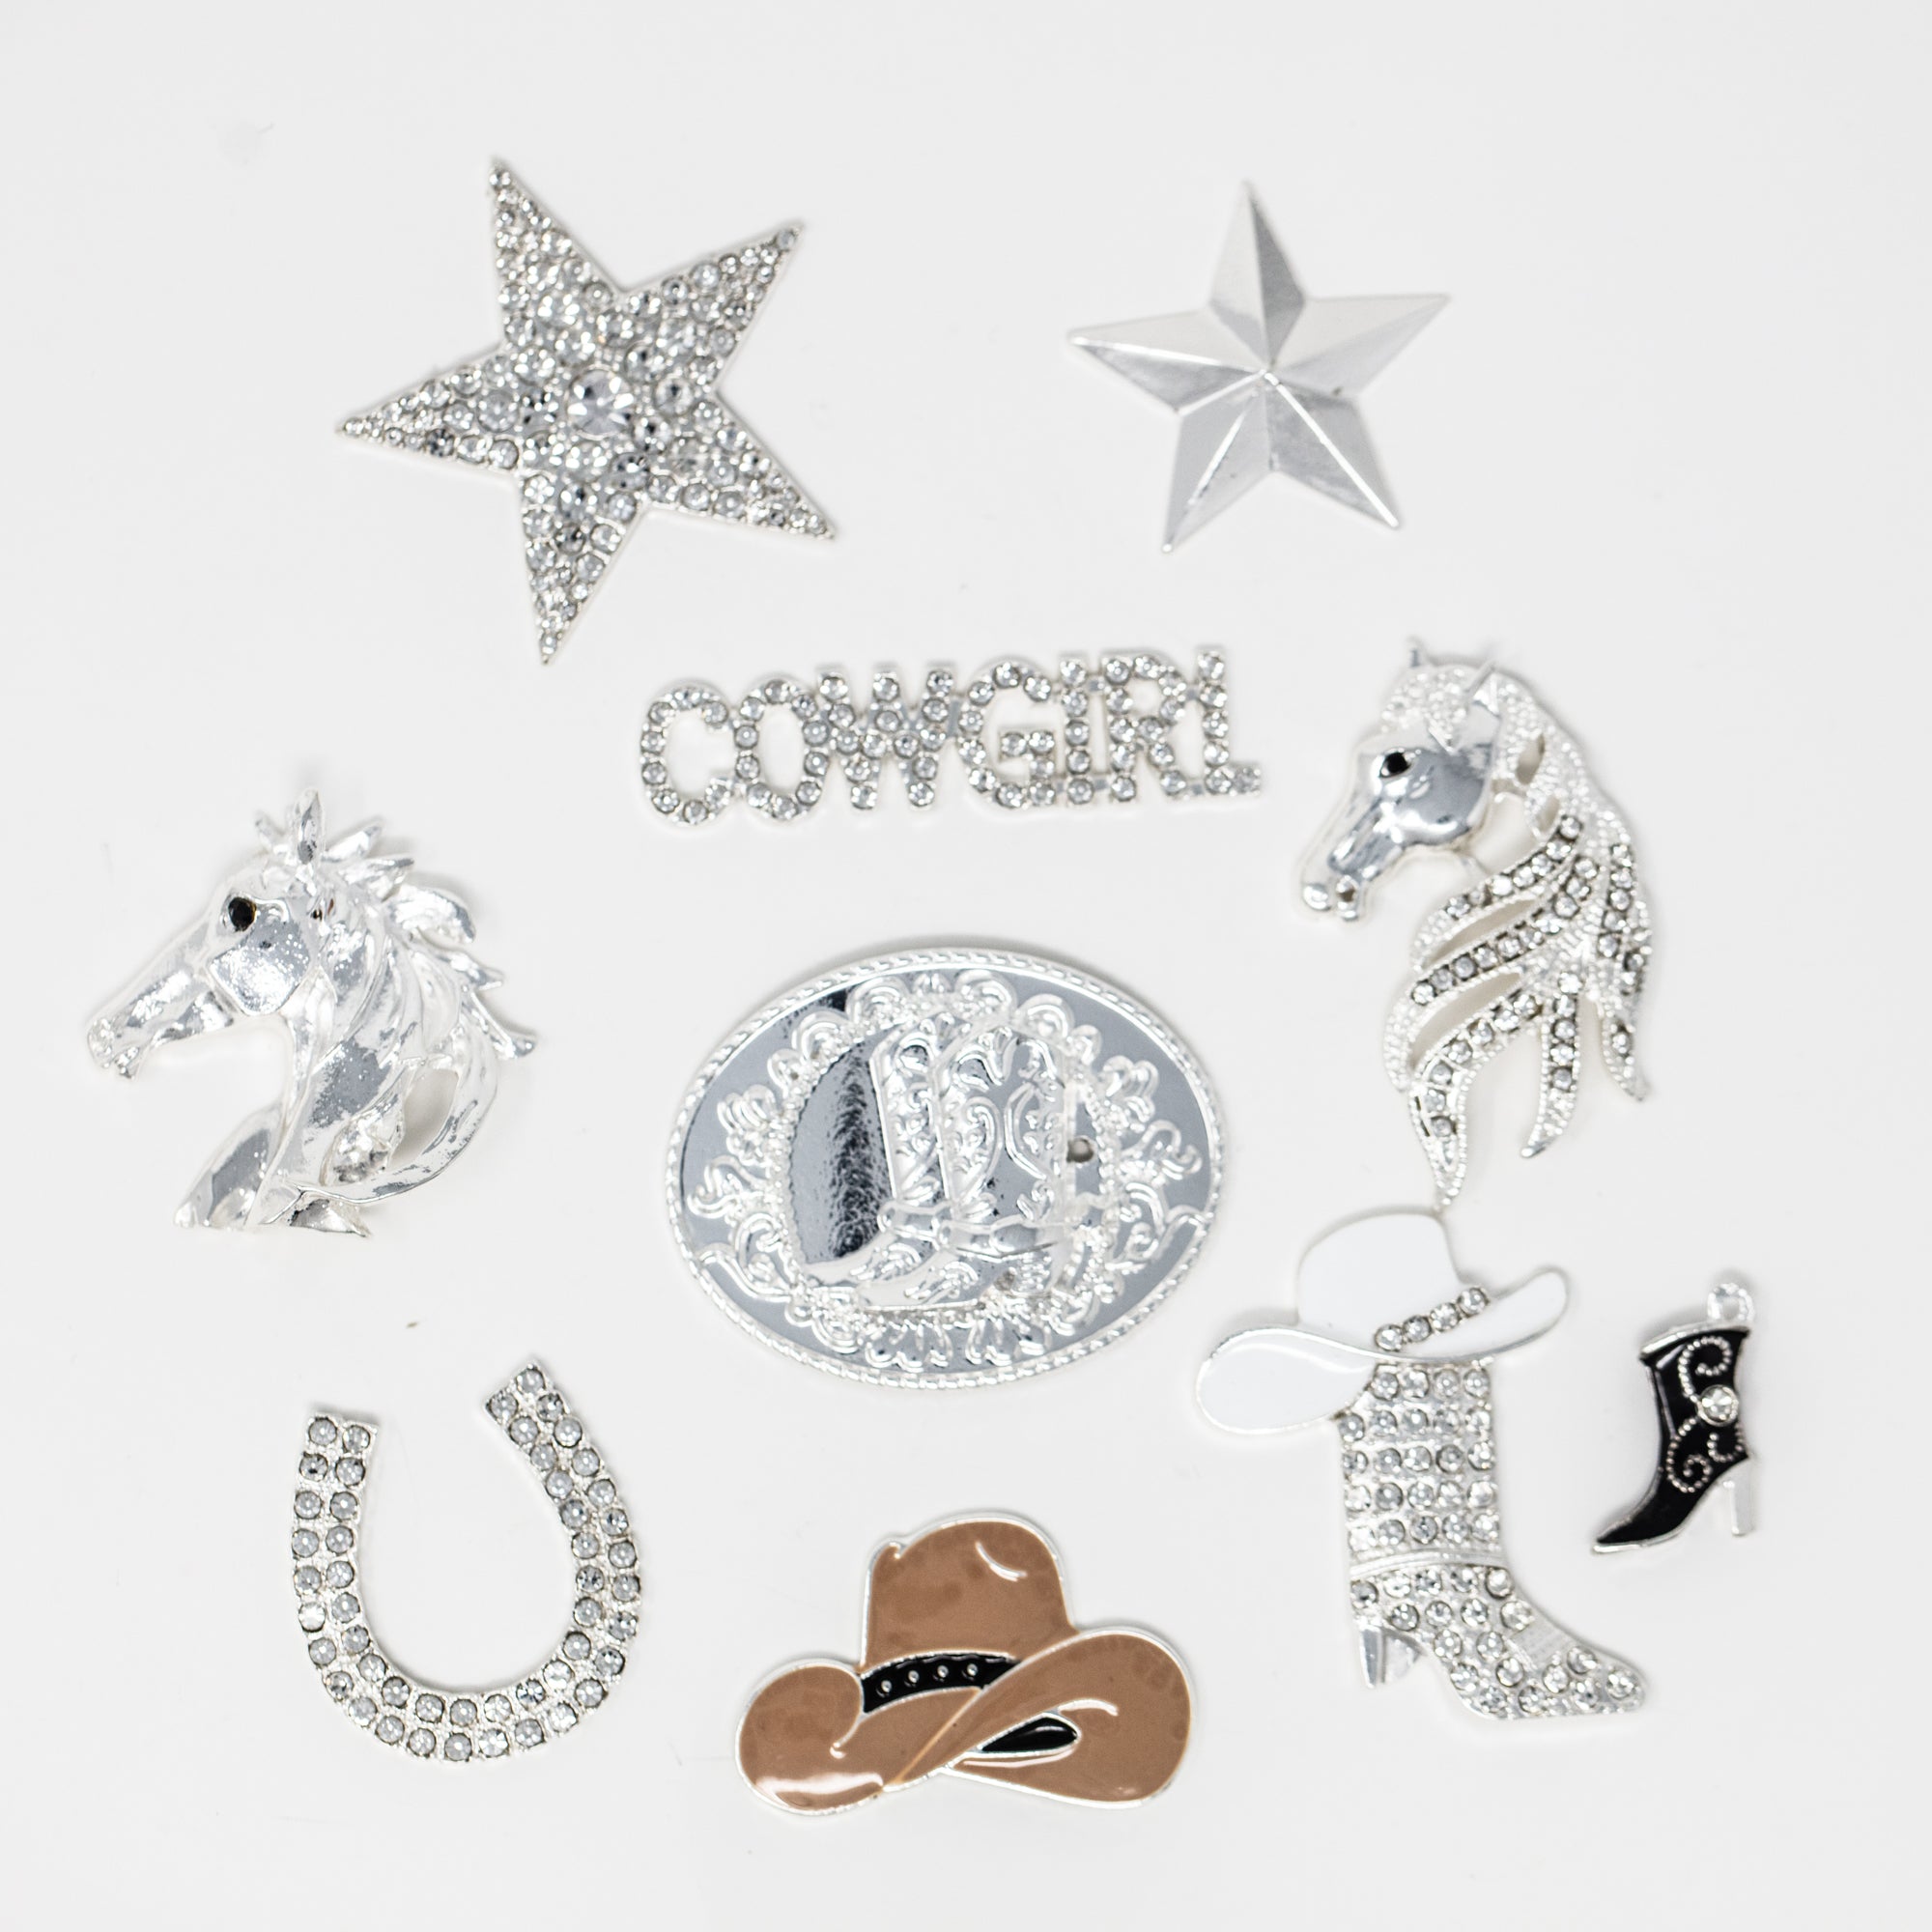 Silver Rhinestone Bows Pack - Totally Dazzled